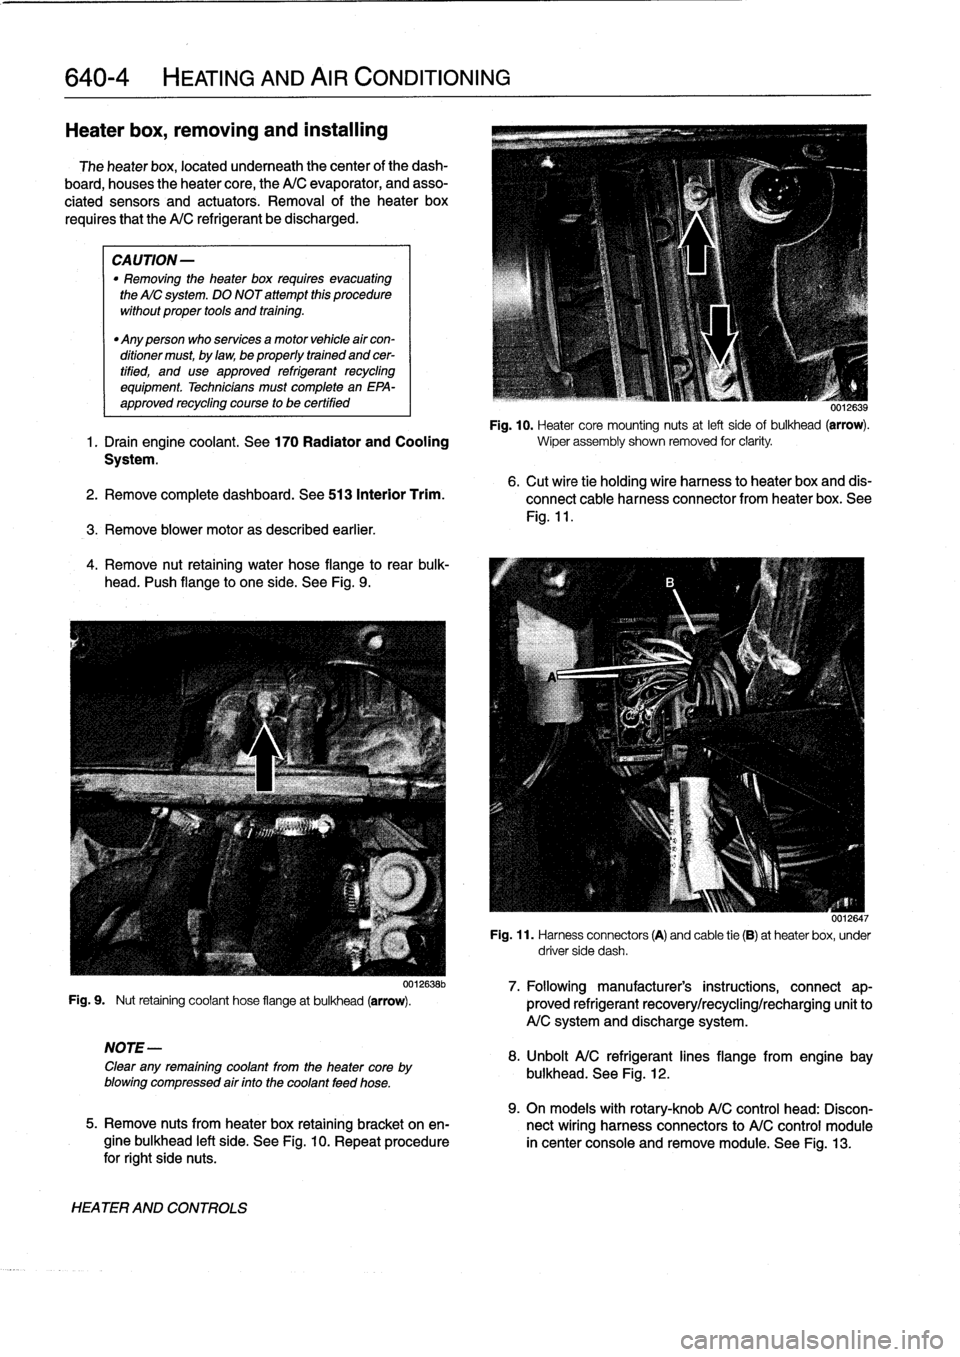 BMW 323i 1993 E36 Owners Manual 
640-4

	

HEATING
AND
AIR
CONDITIONING

Heater
box,
removing
and
installing

The
heater
box,
located
underneath
thecenter
of
the
dash-

board,
houses
theheater
core,
the
A/C
evaporator,
and
asso-

ci